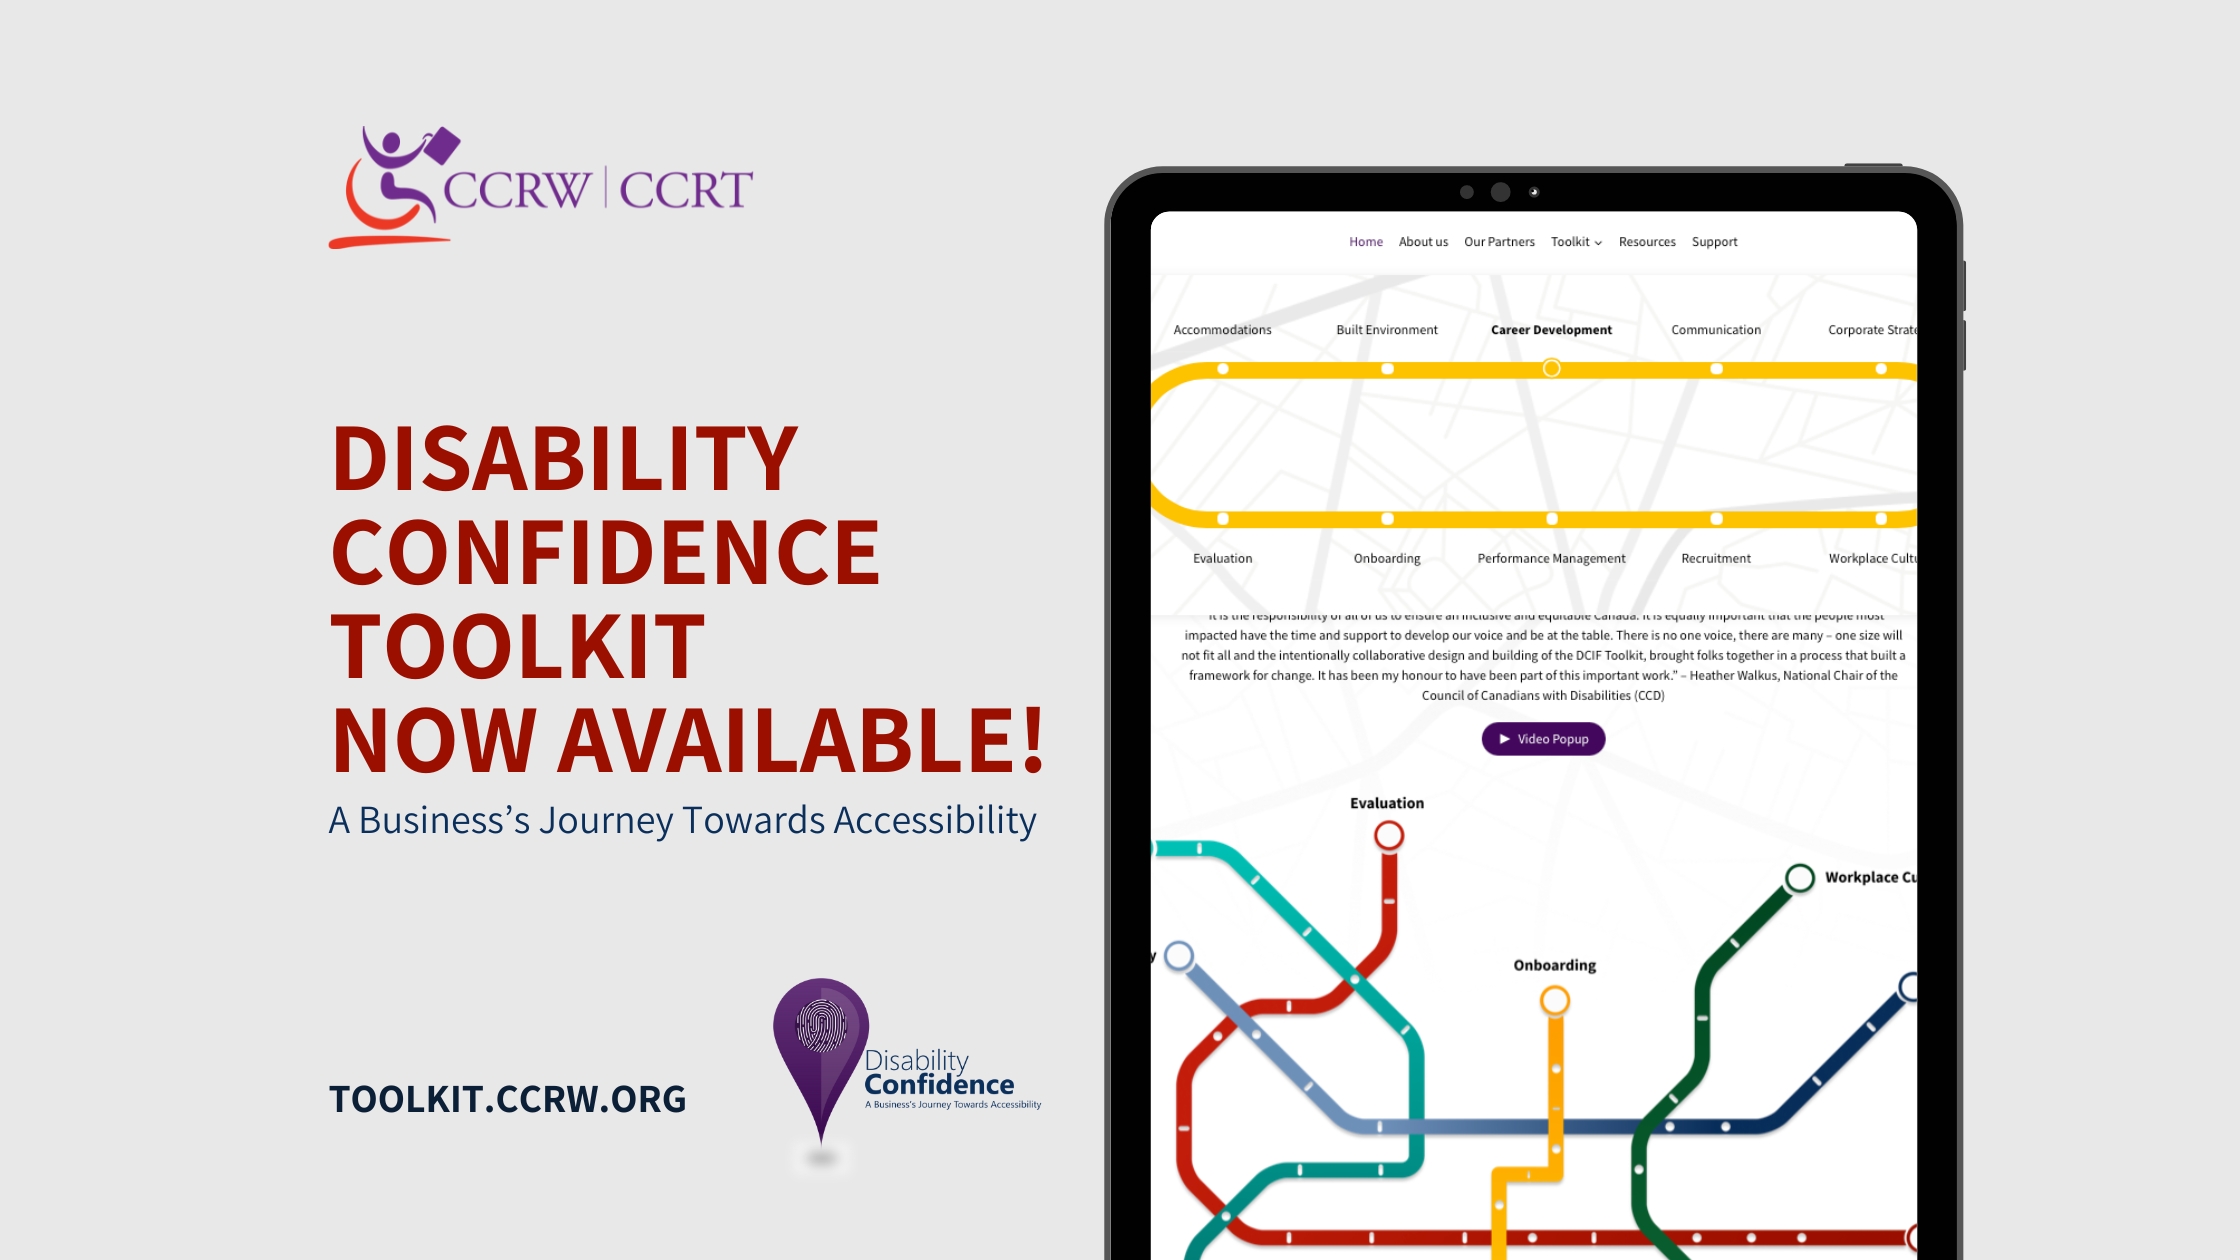 Our Disability Confidence Toolkit is Now Available